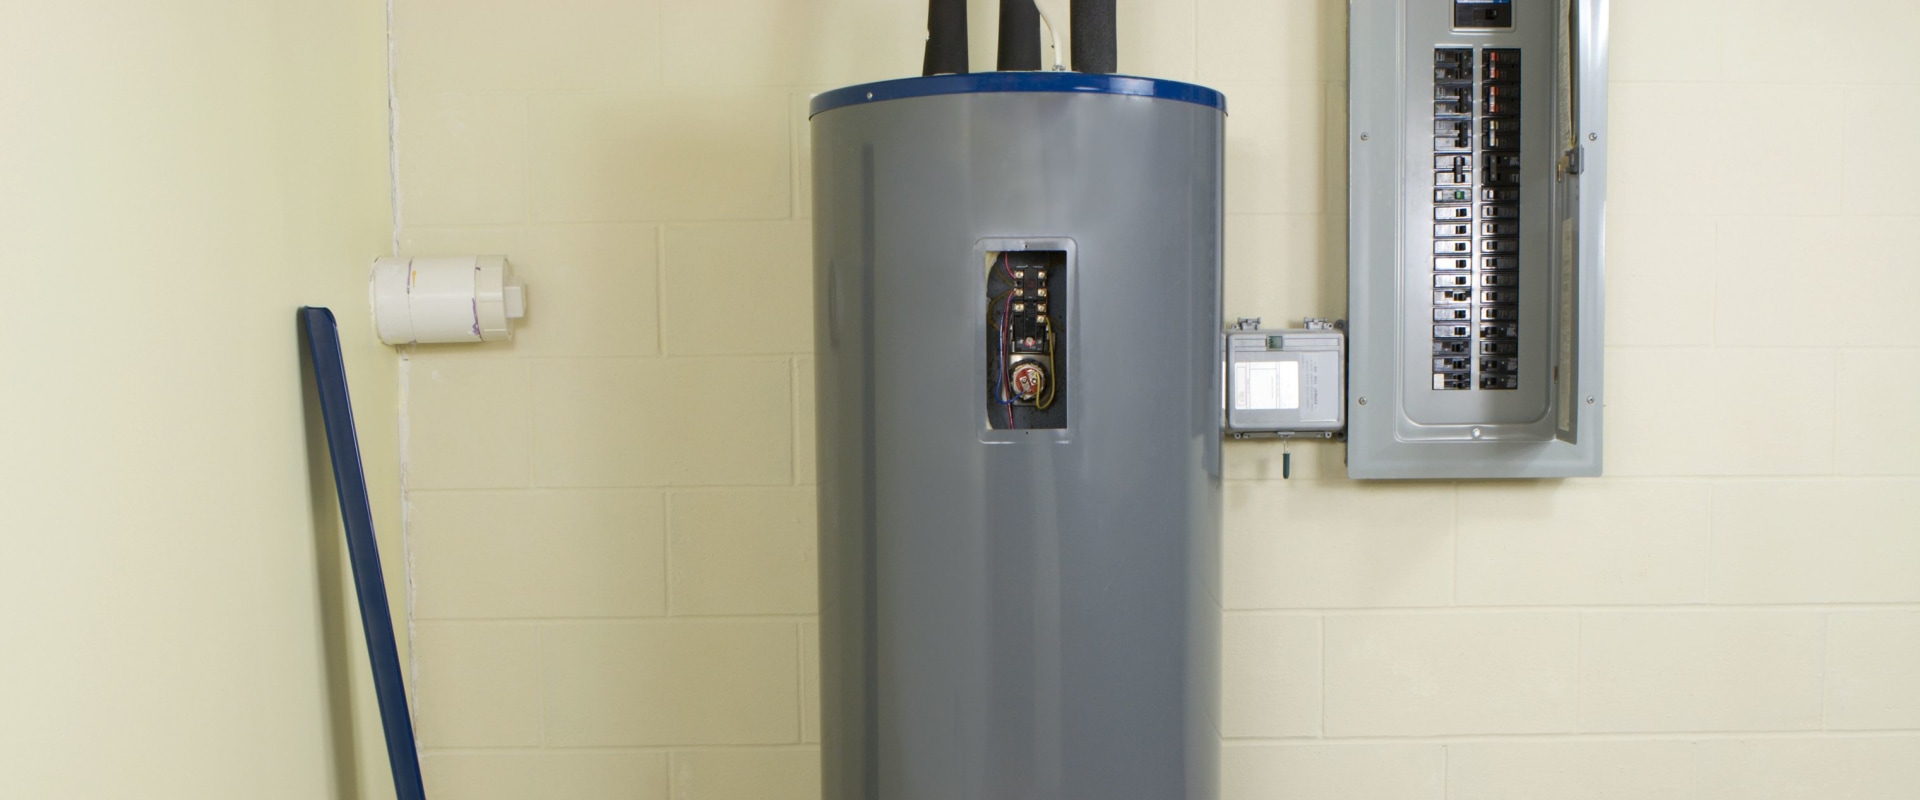 How long does a new electric hot water system take to heat up?